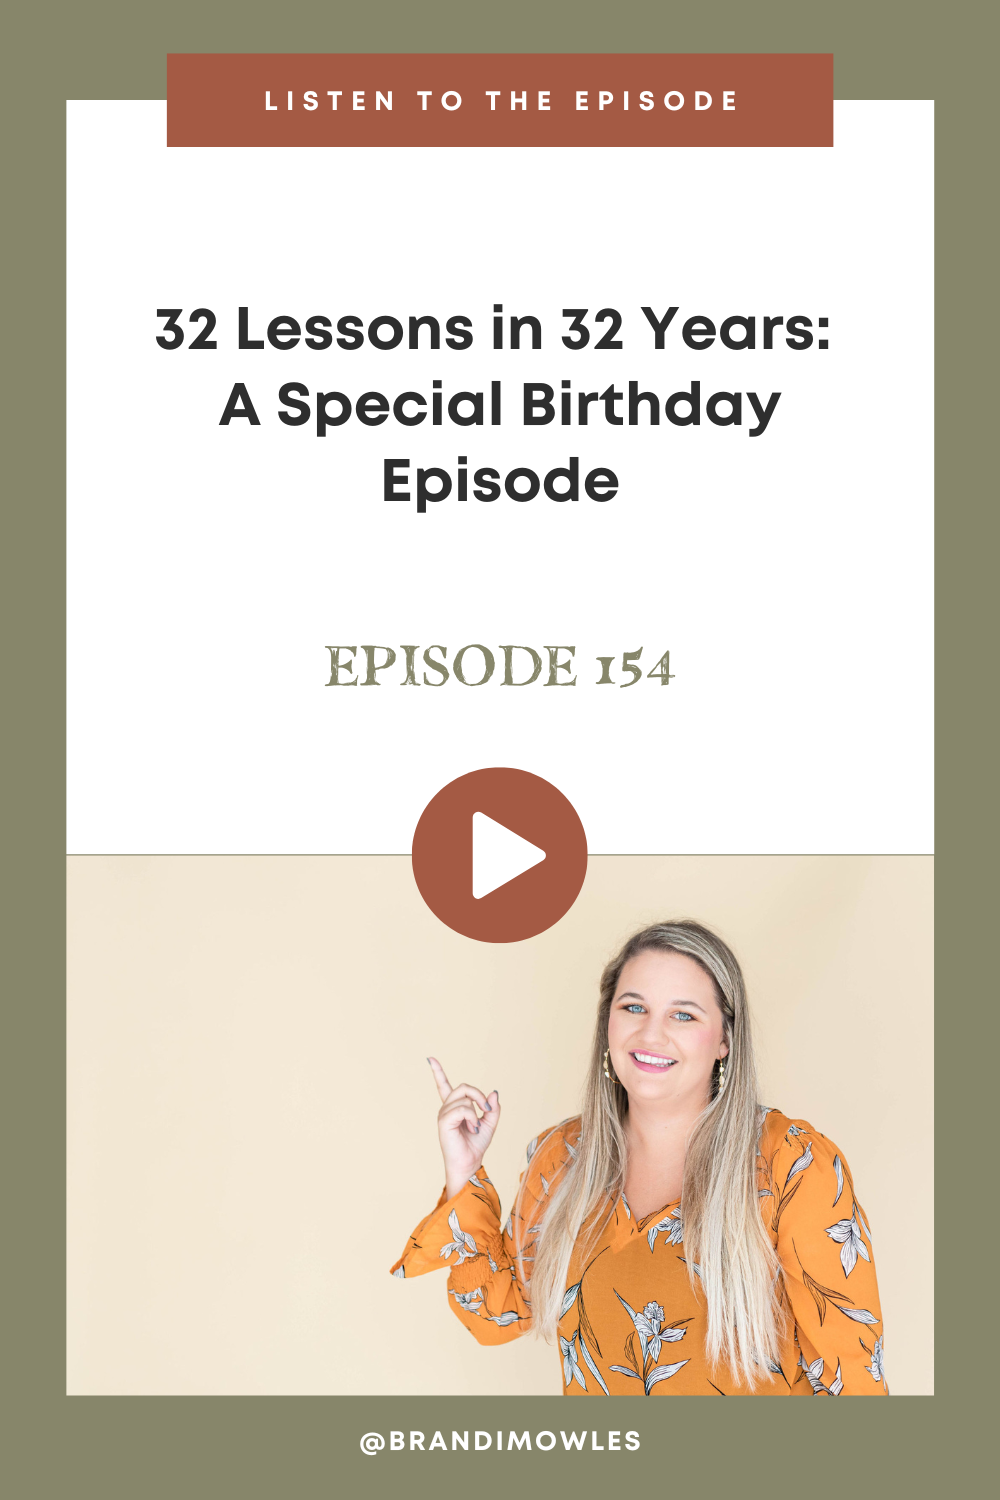 Brandi Mowles podcast feature about lessons learned in 32 years